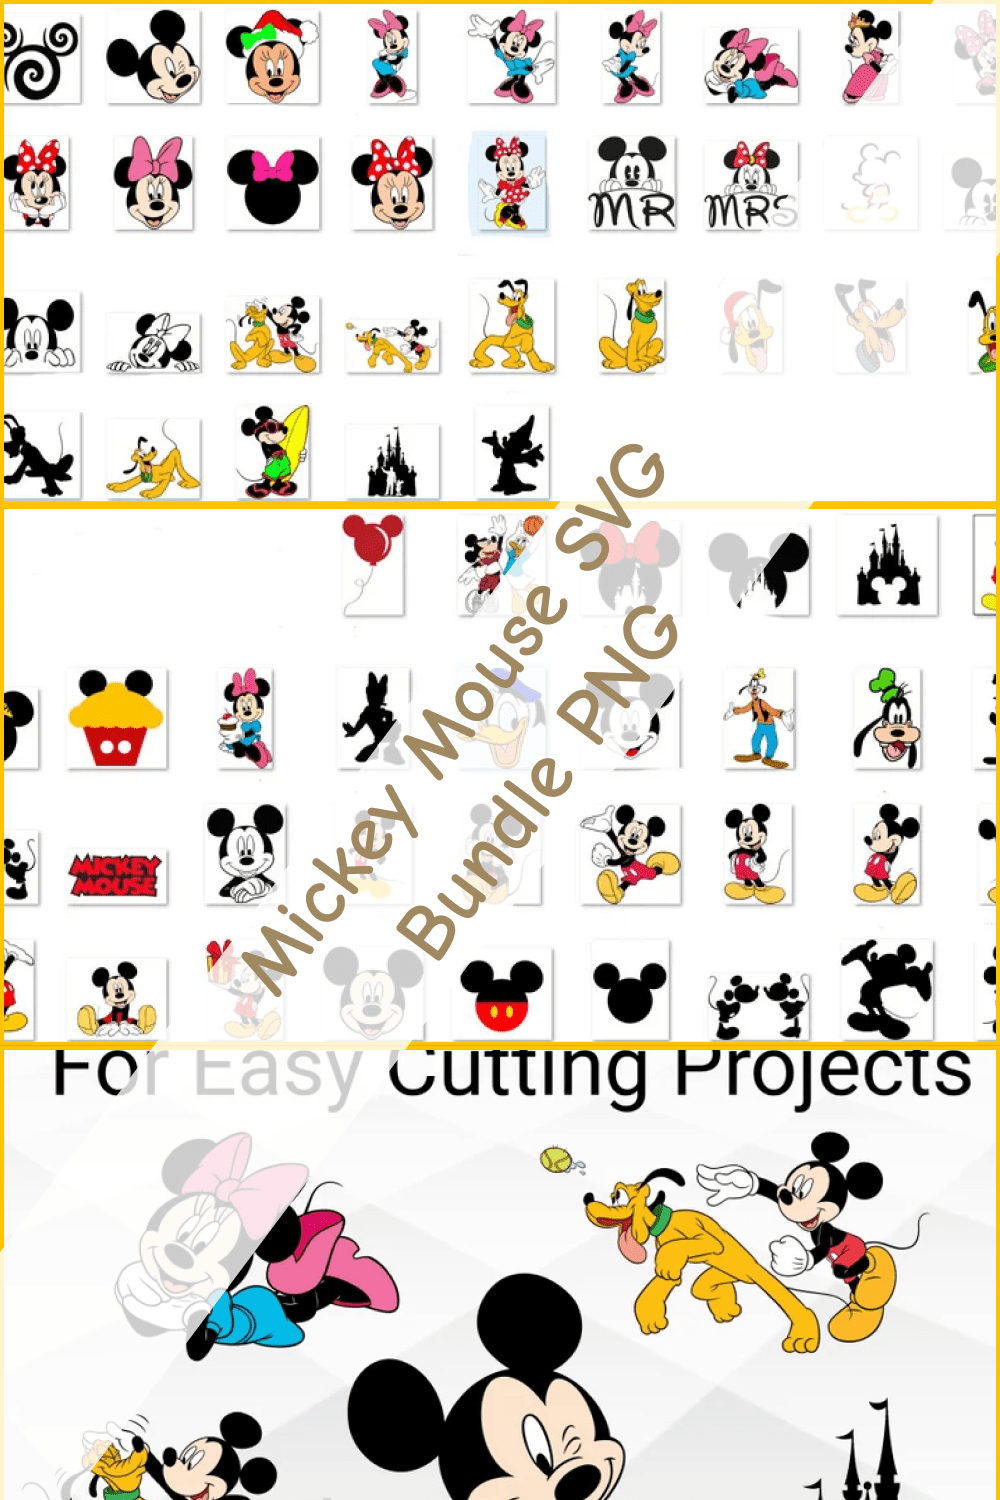 A lot of characters from Mickey Mouse cartoon.